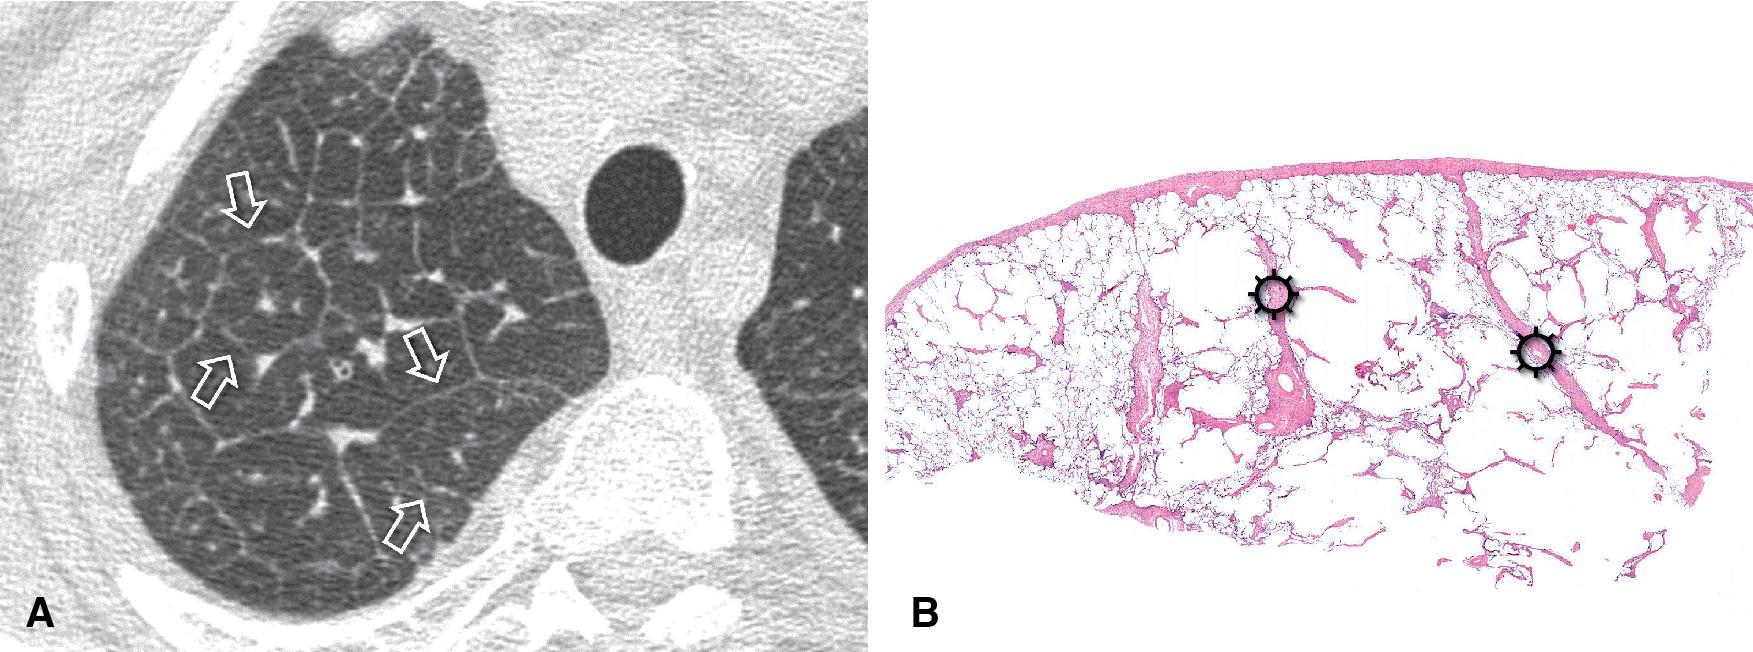 Figure 4.21, Septal pattern, subset smooth. (A) CT image shows polygonal outlines of the lobules without focal abnormalities (arrows) . Smooth thickening of the peribronchovascular interstitium is also visible. (B) On histology, smooth thickening of interlobular septa (sun) is apparent at low power. The visceral pleura is slightly thickened (Erdheim-Chester disease, H&E).